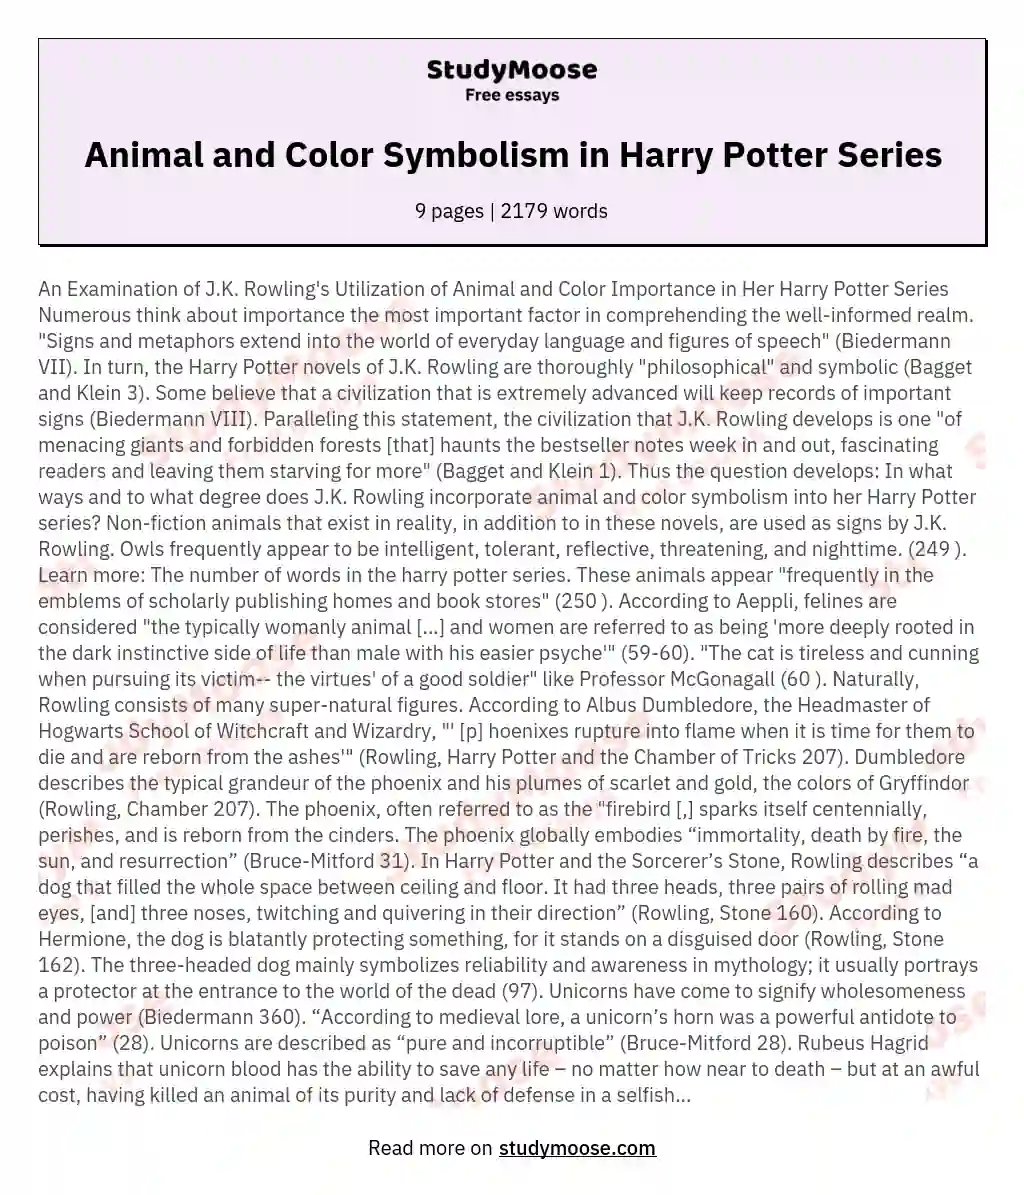 Animal and Color Symbolism in Harry Potter Series